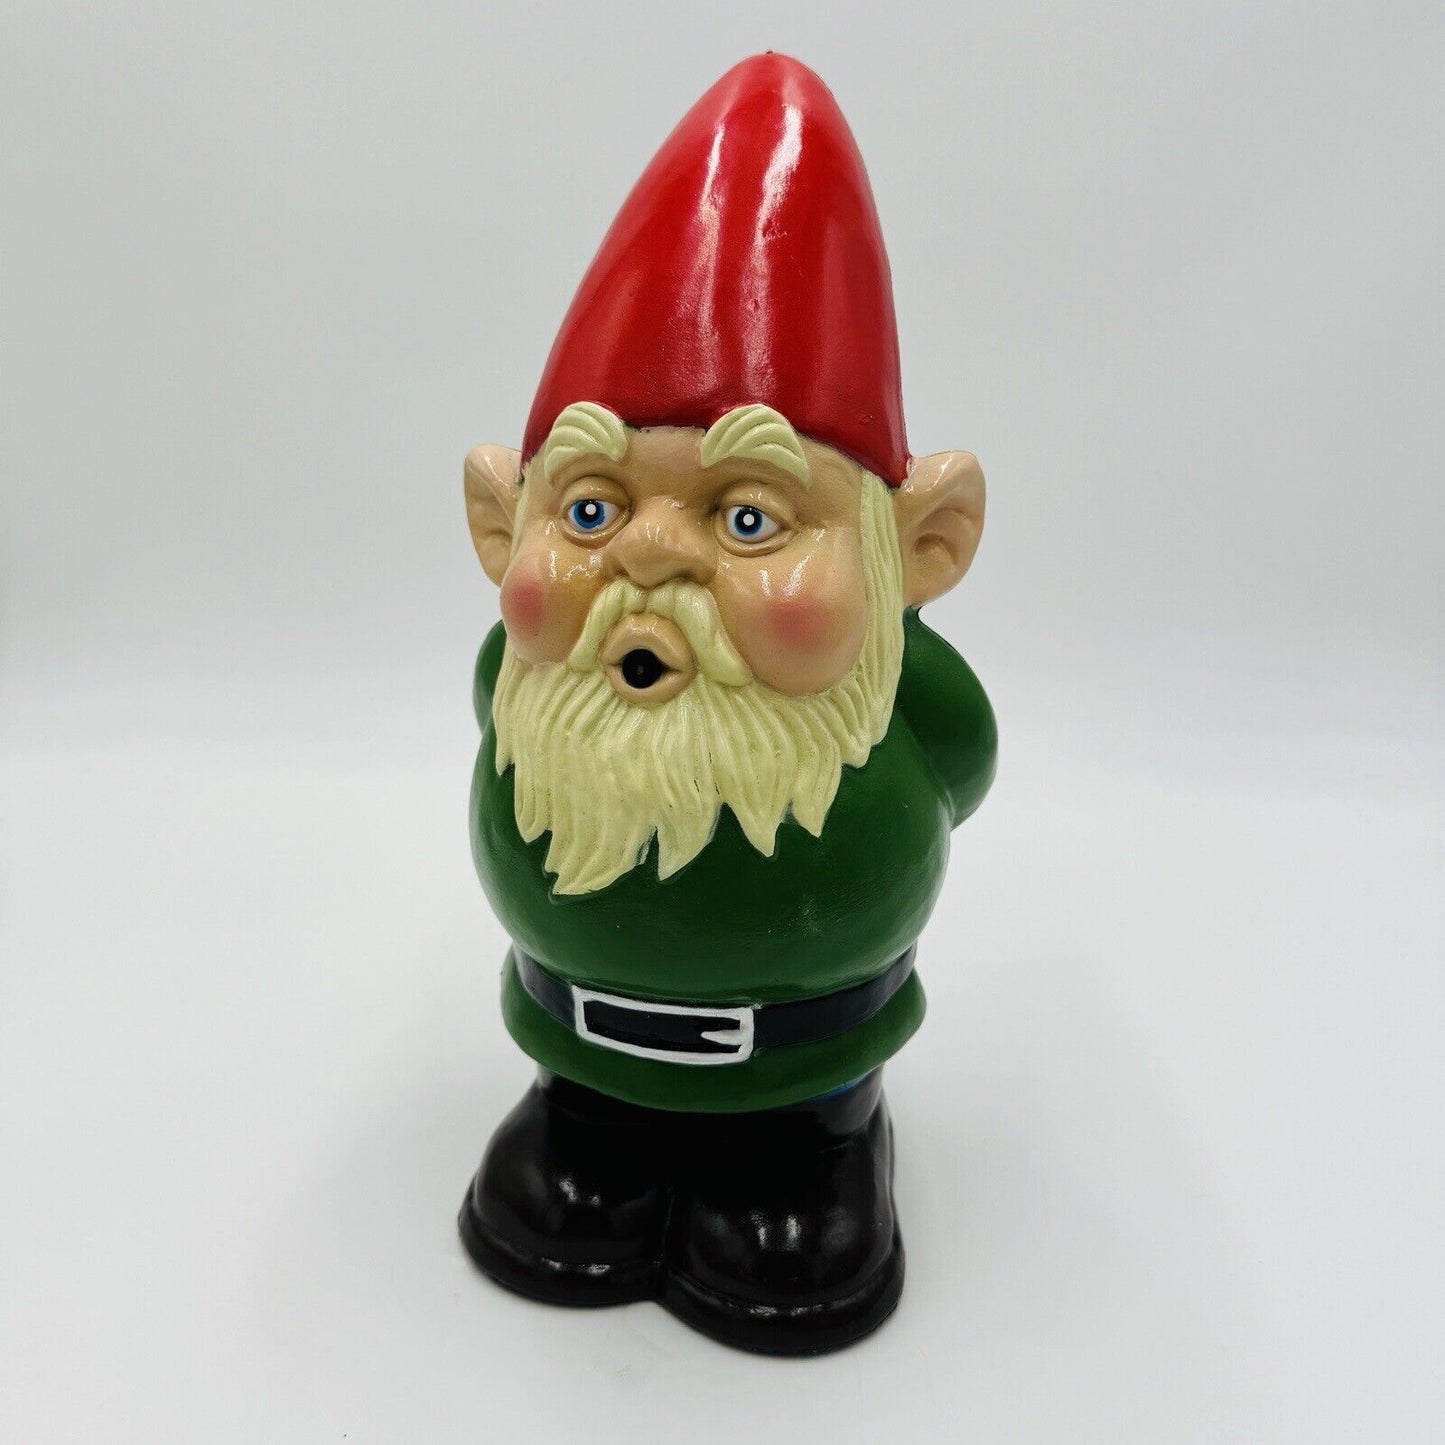 Big Mouth Toys Whistling Garden Gnome Motion Activated Sound Outdoor Sculpture